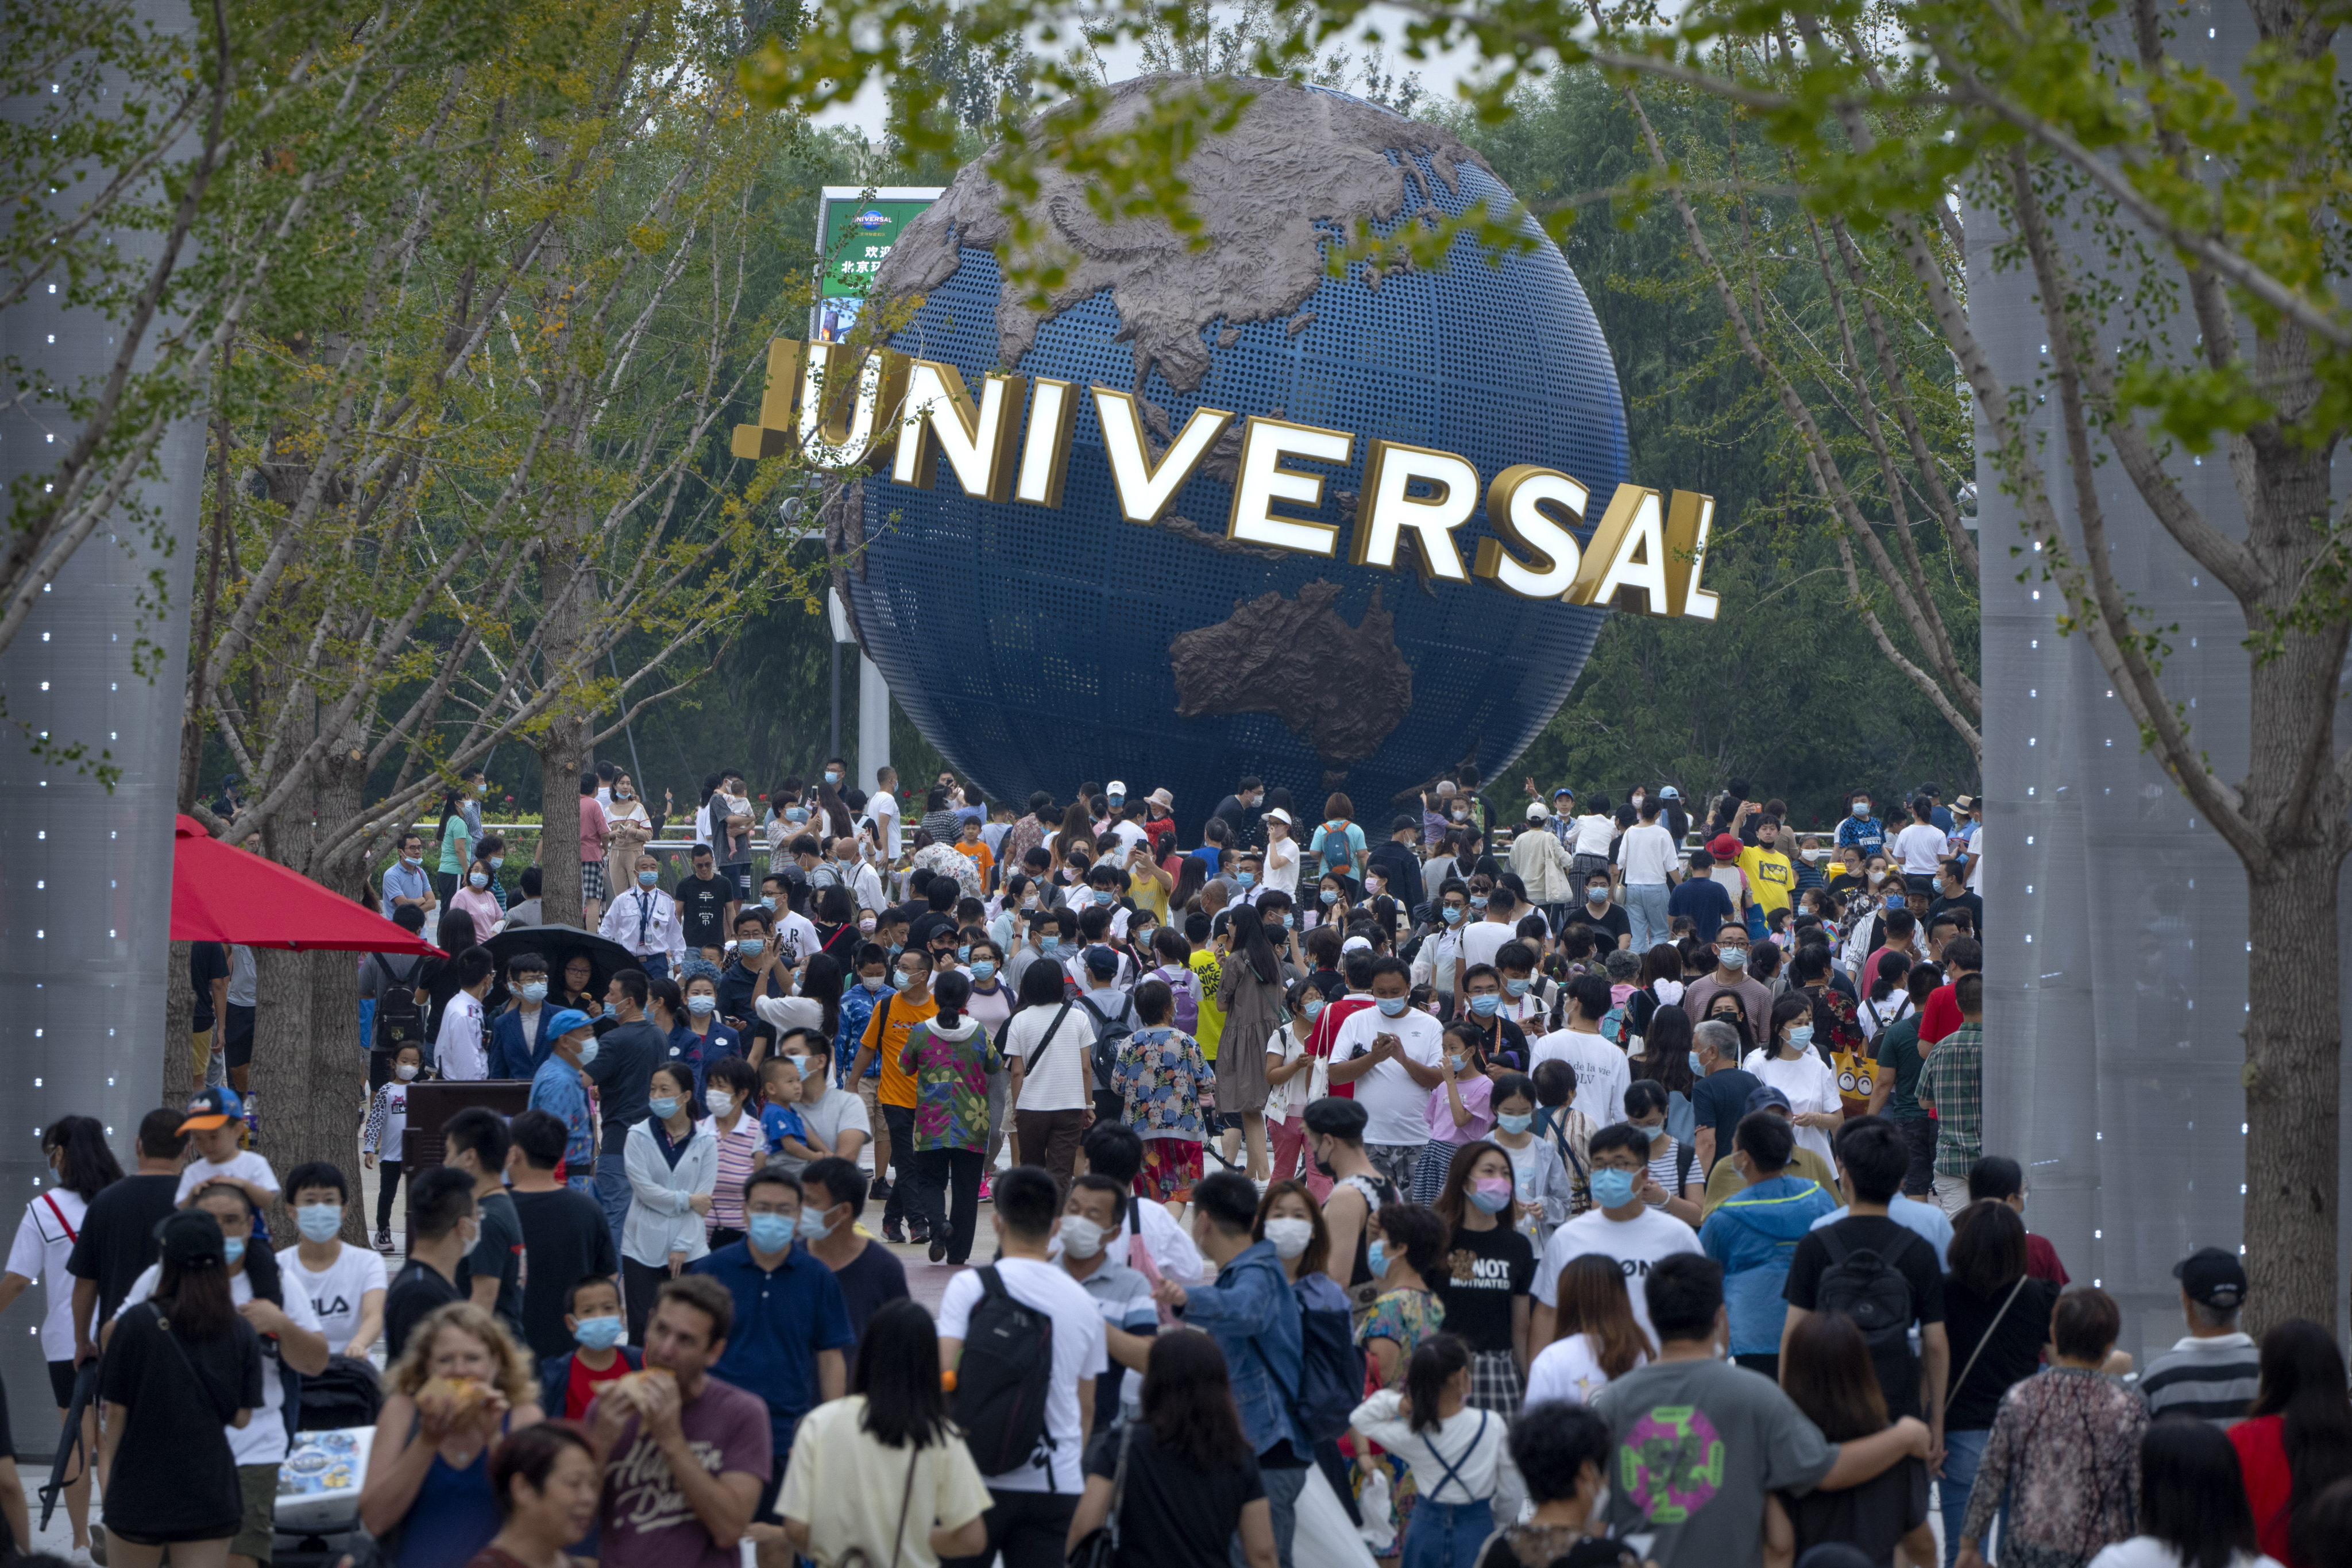 Tickets for both Shanghai Disneyland and Universal Studios Beijing (pictured) almost sold out ahead of the Labour Day holiday. Photo: AP